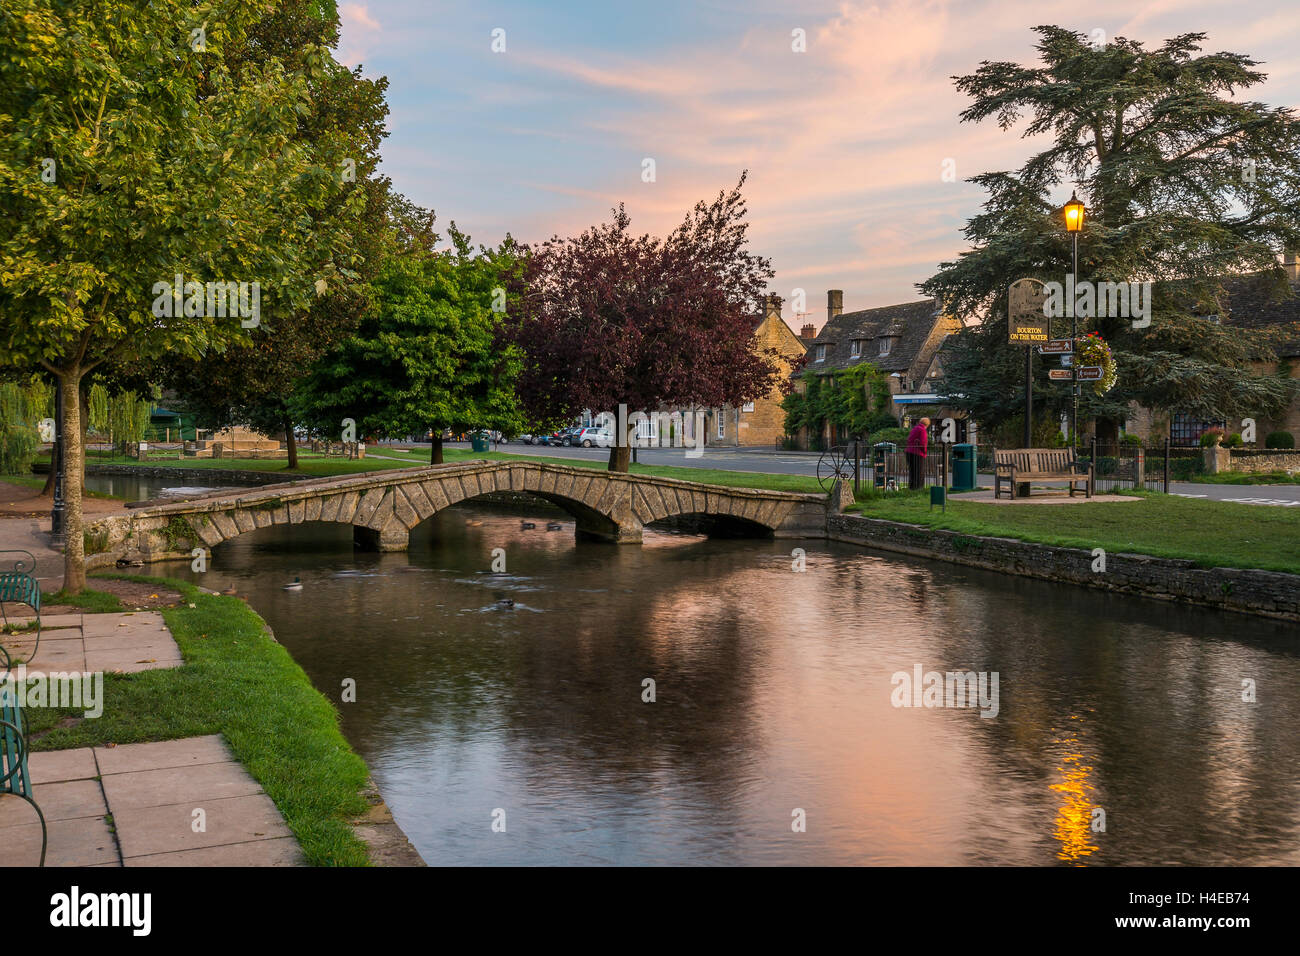 Bourton-on-the-Water at sunrise. Stock Photo